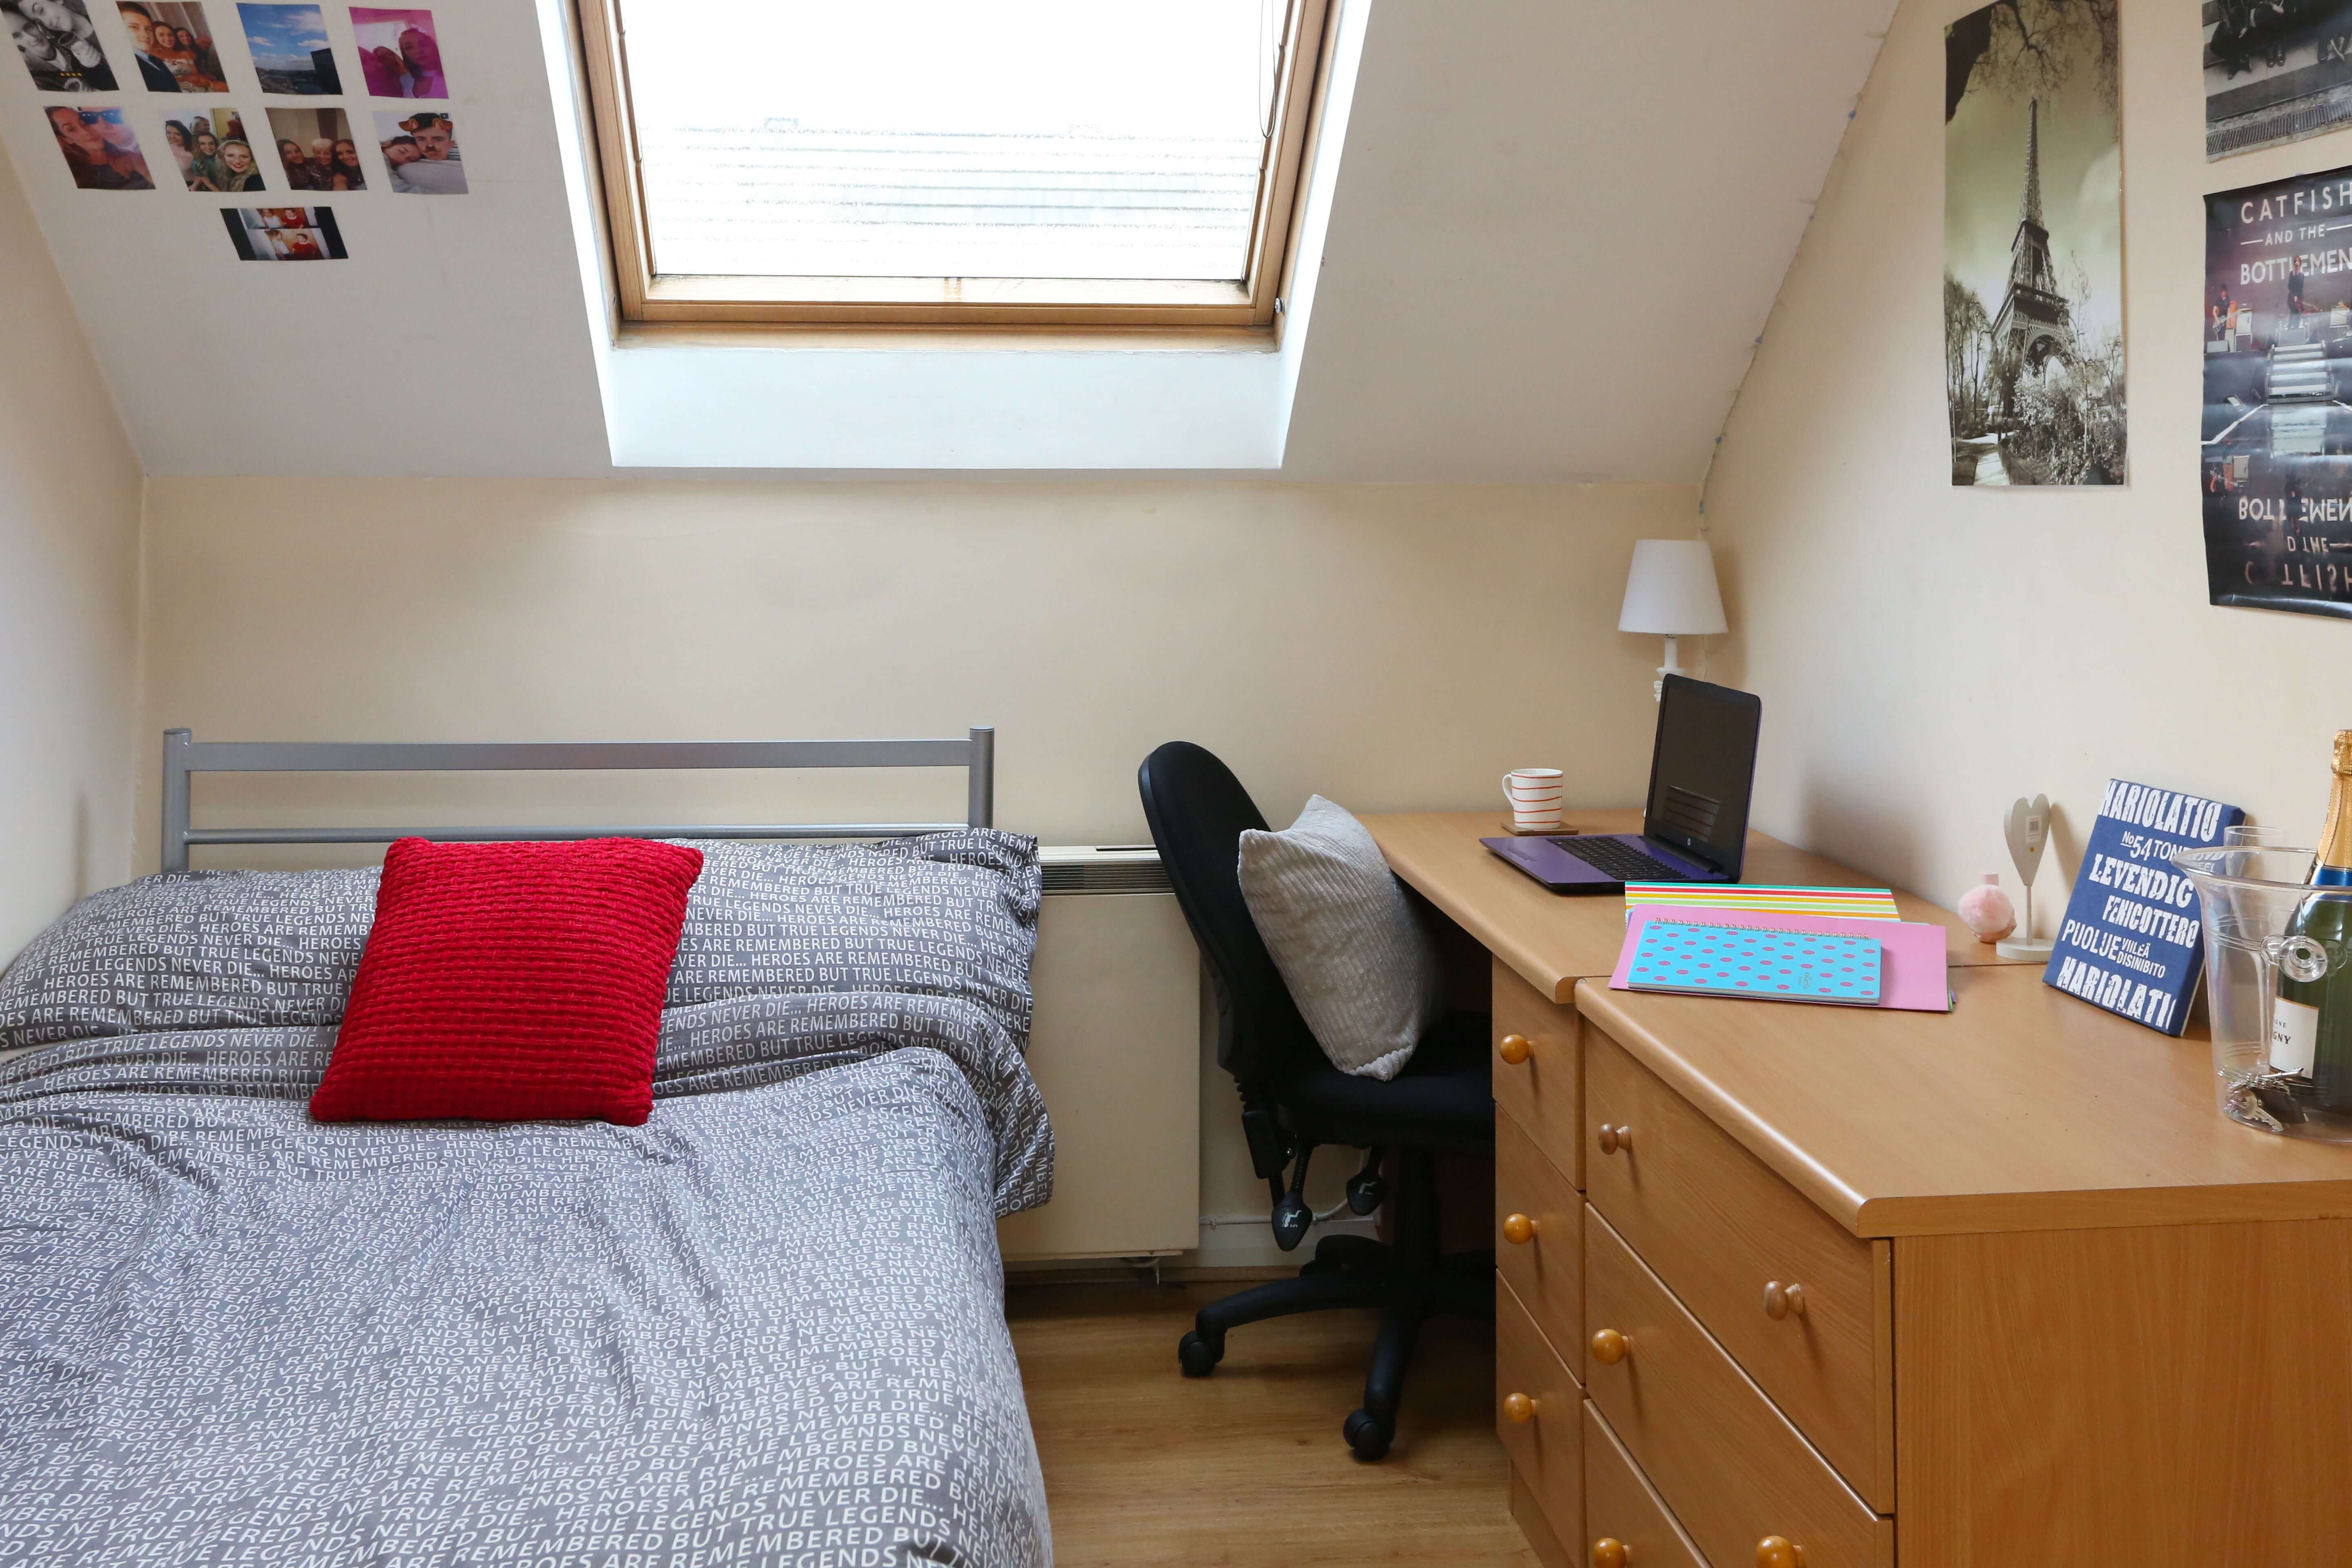 Student Flats in Manchester | Search for Student Flats | StudyFlats